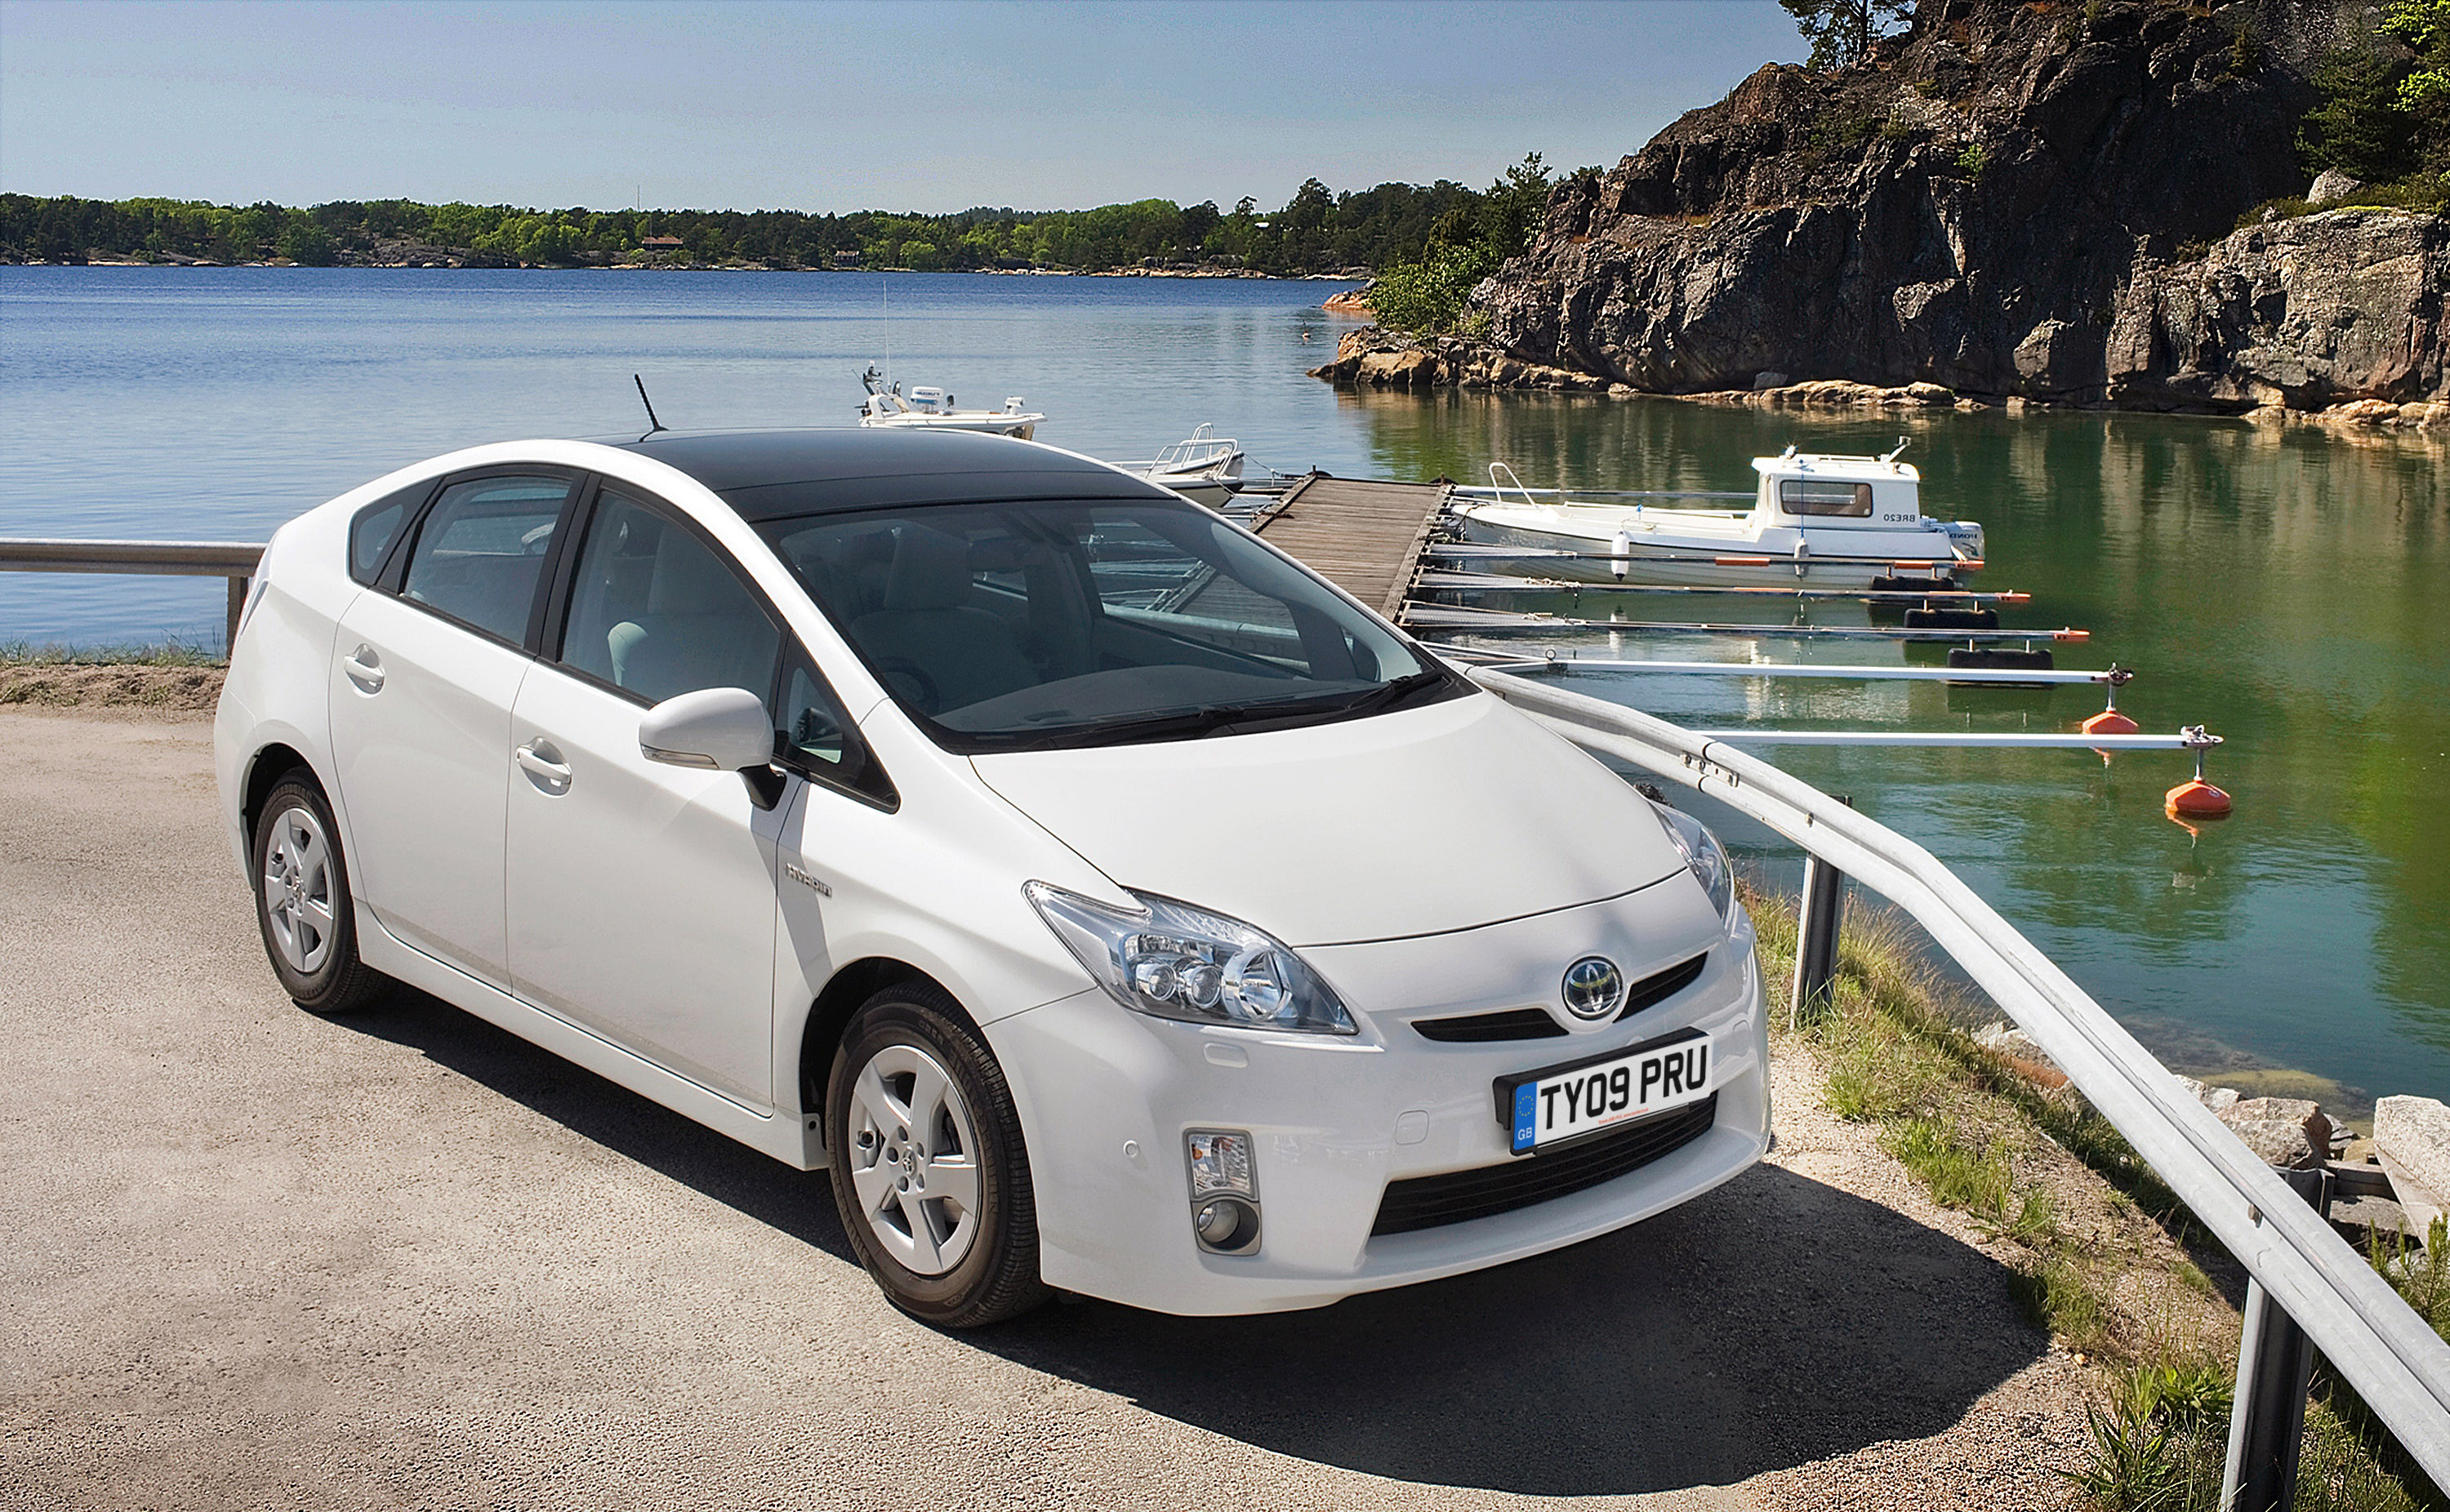 New Prius: Cooled By The Heat Of The Sun